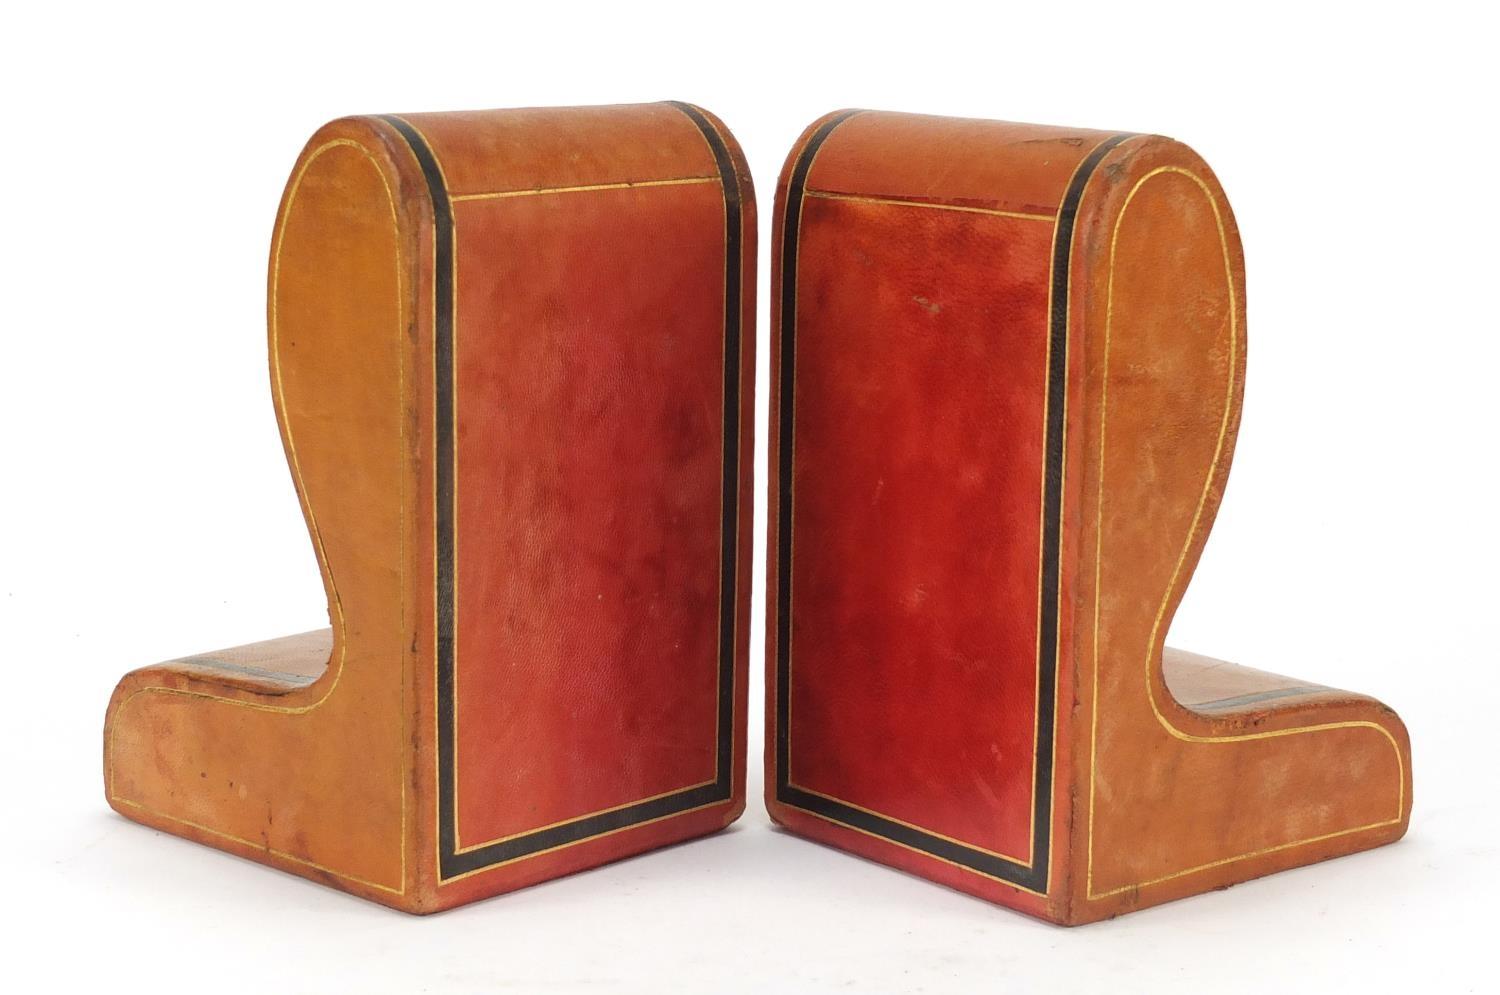 Pair of Italian tooled leather book ends with embossed crests, retailed by Harrods, each 17cm high : - Image 4 of 9